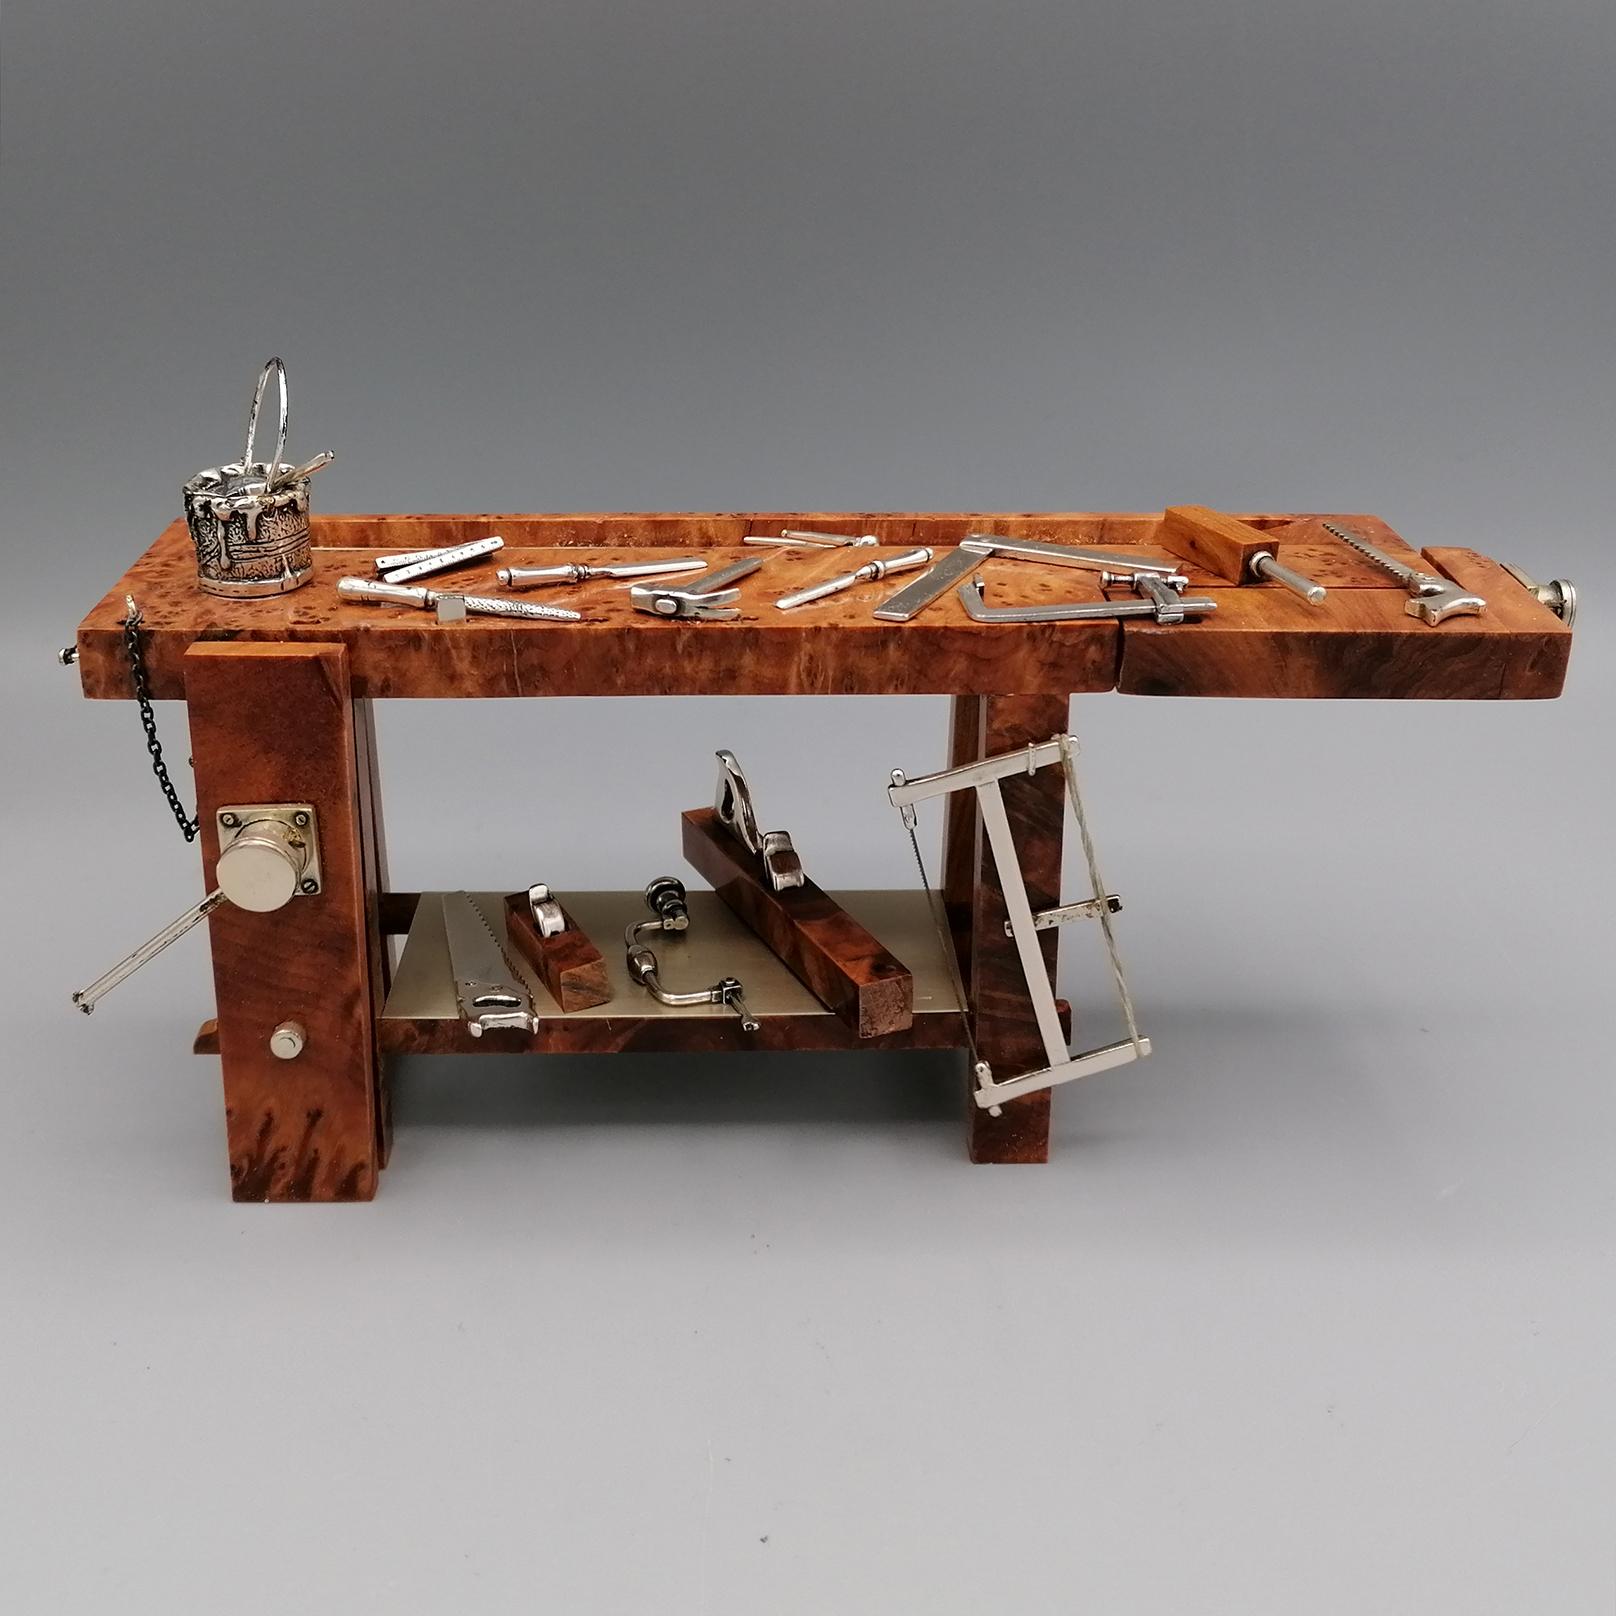 Silver and wood carpenter workbench miniature.
The miniature was made entirely by hand in Italy, Arezzo, Tuscany by the Creazioni Sacchetti silversmith.
Silverware that closed its business several years ago.
It is no longer possible to remake this